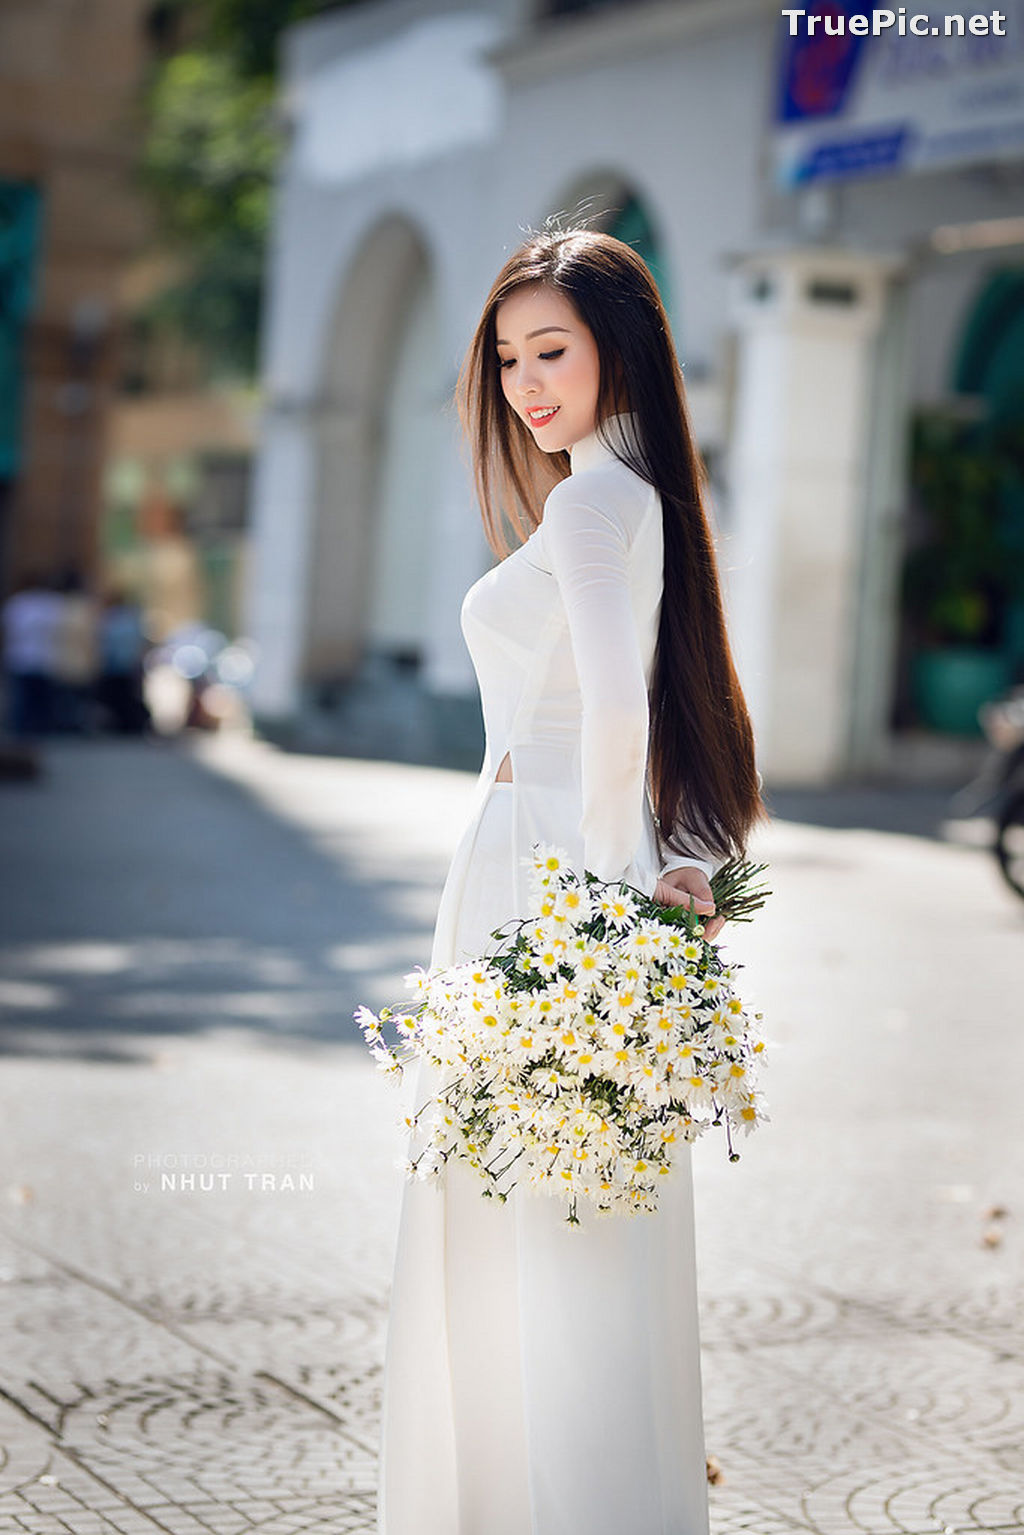 Image The Beauty of Vietnamese Girls with Traditional Dress (Ao Dai) #5 - TruePic.net - Picture-46